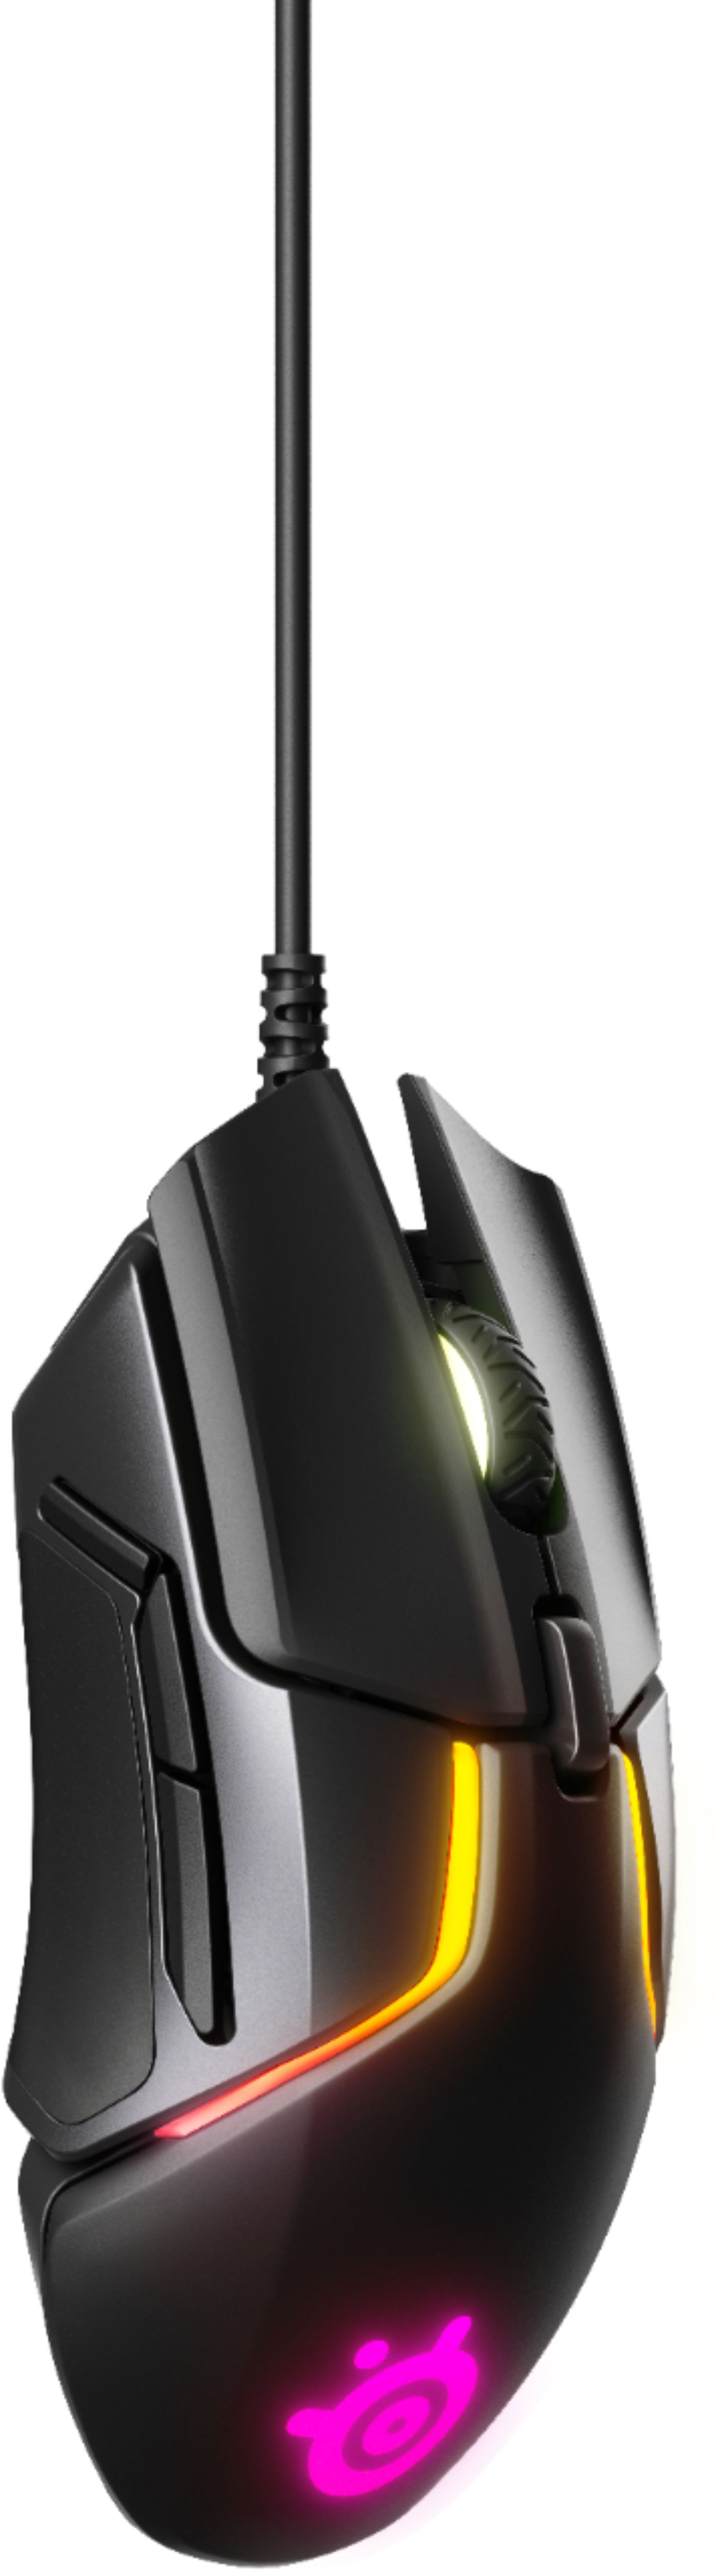 Angle View: HP OMEN - Reactor Wired Optical-Mechanical Gaming Mouse with RGB Lighting - Black